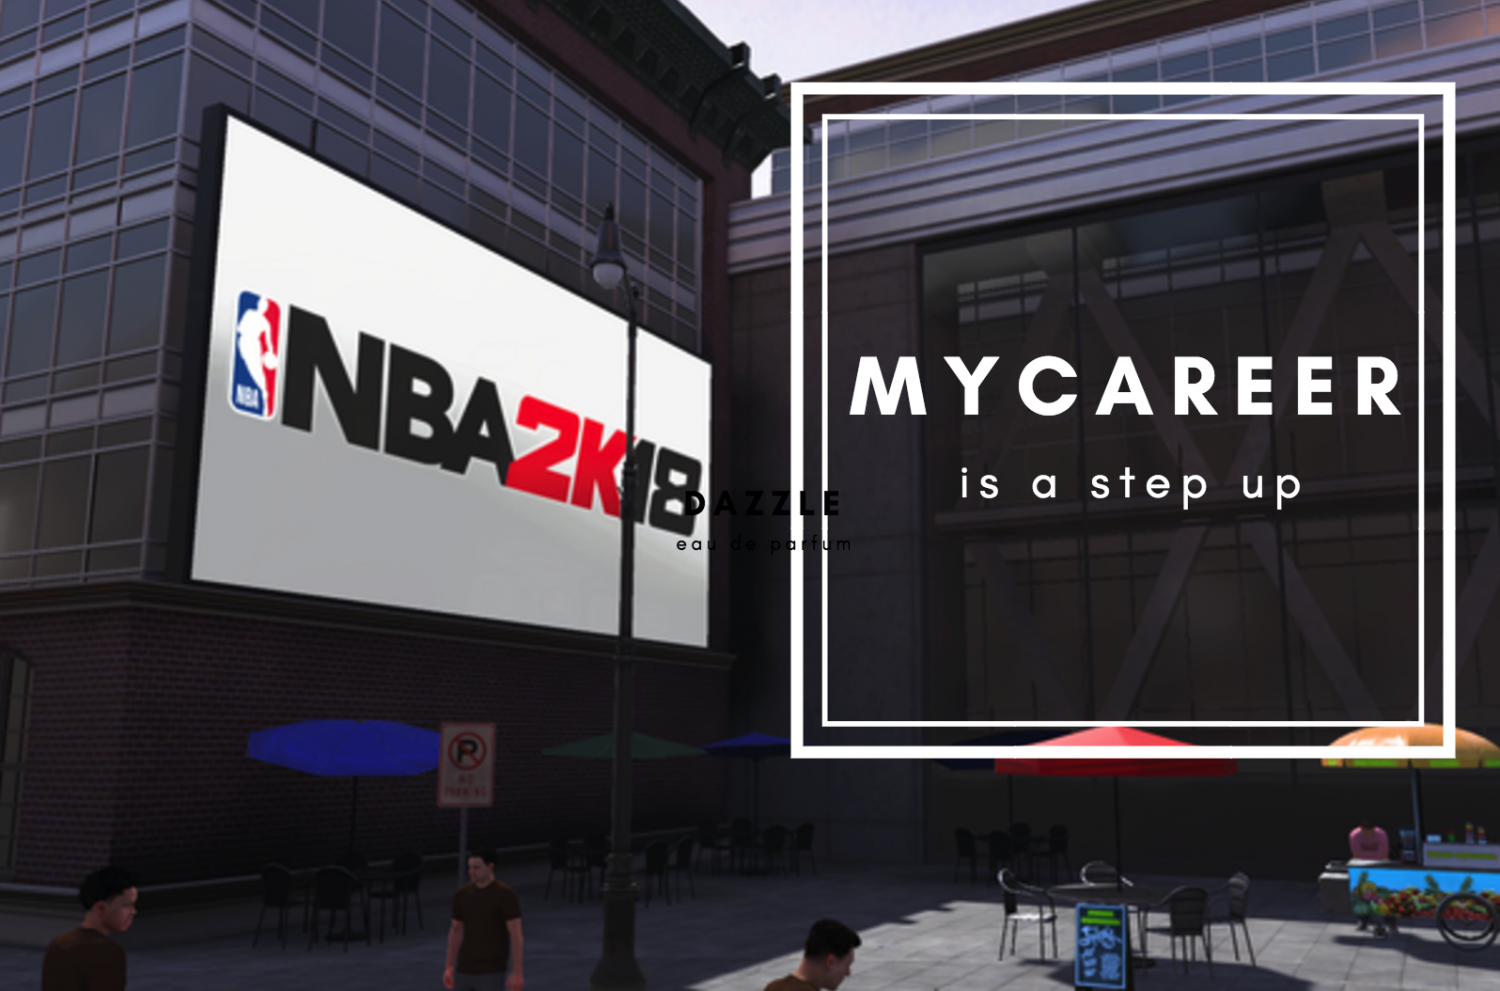 NBA+2K18s+MyCareer+is+a+step+up+from+previous+years